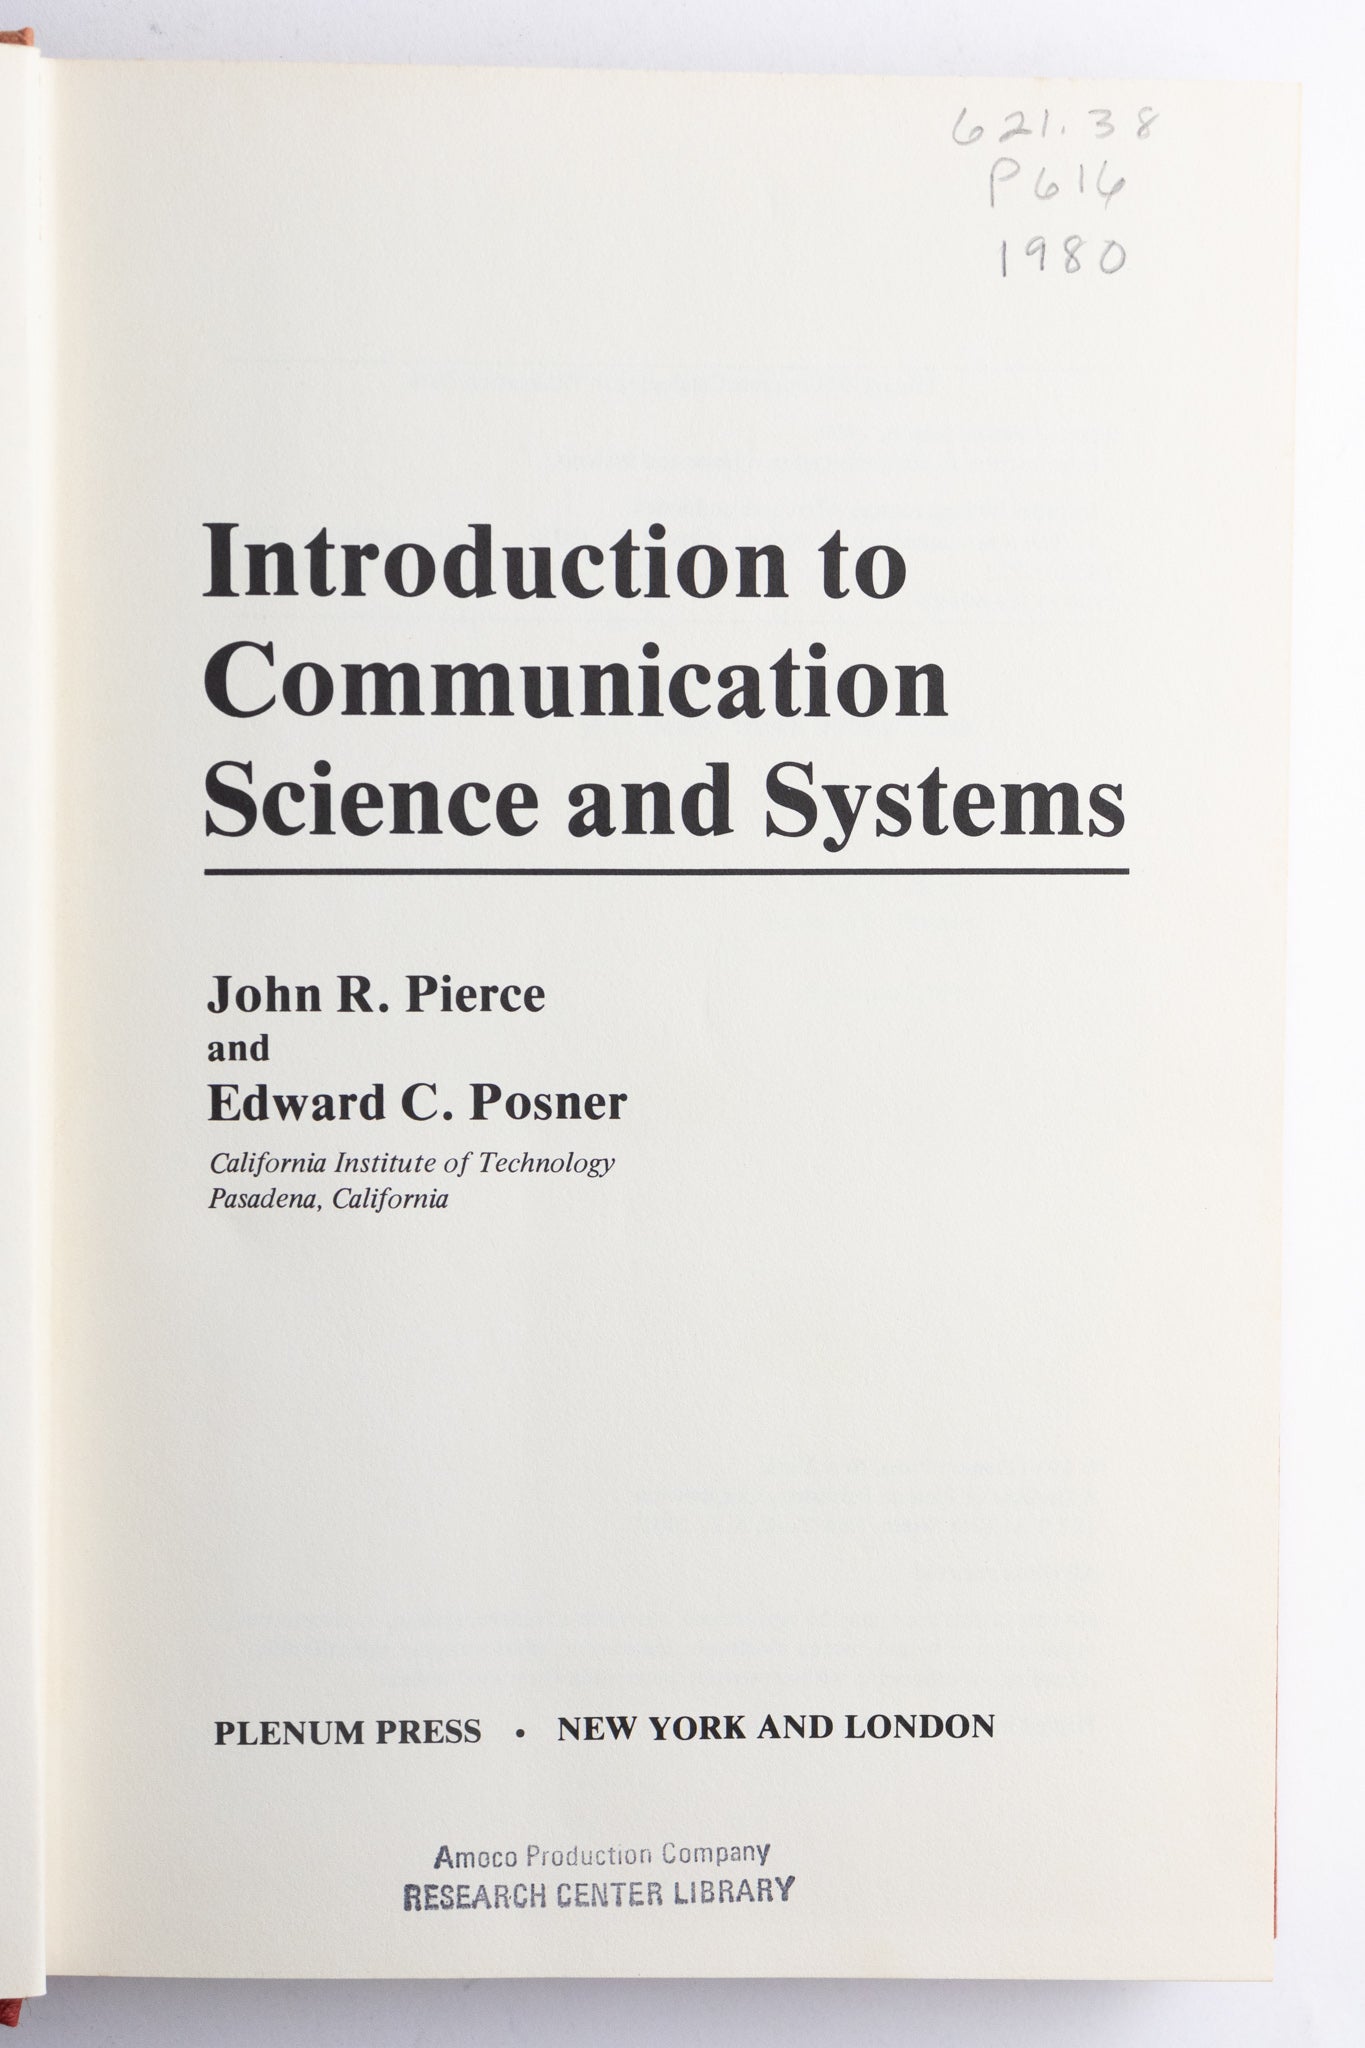 Introduction to Communication Science and Systems - Stemcell Science Shop